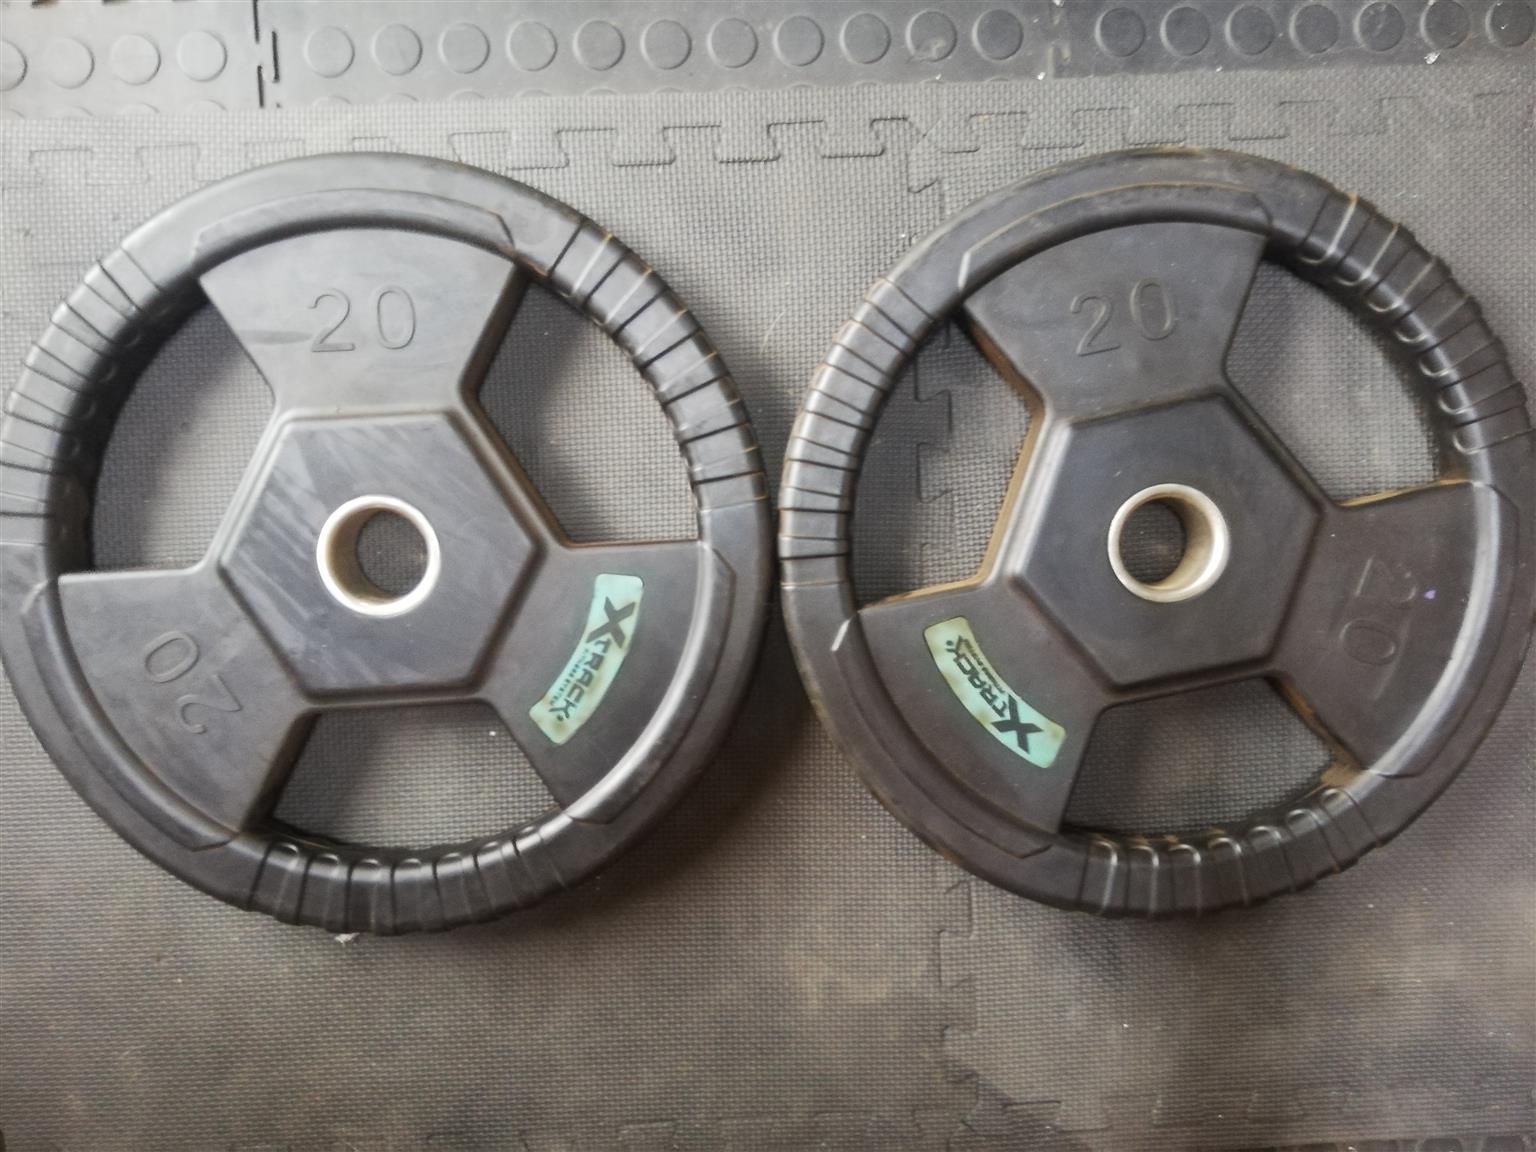 Olympic tri grip weight plates 2x20kg (NEW).